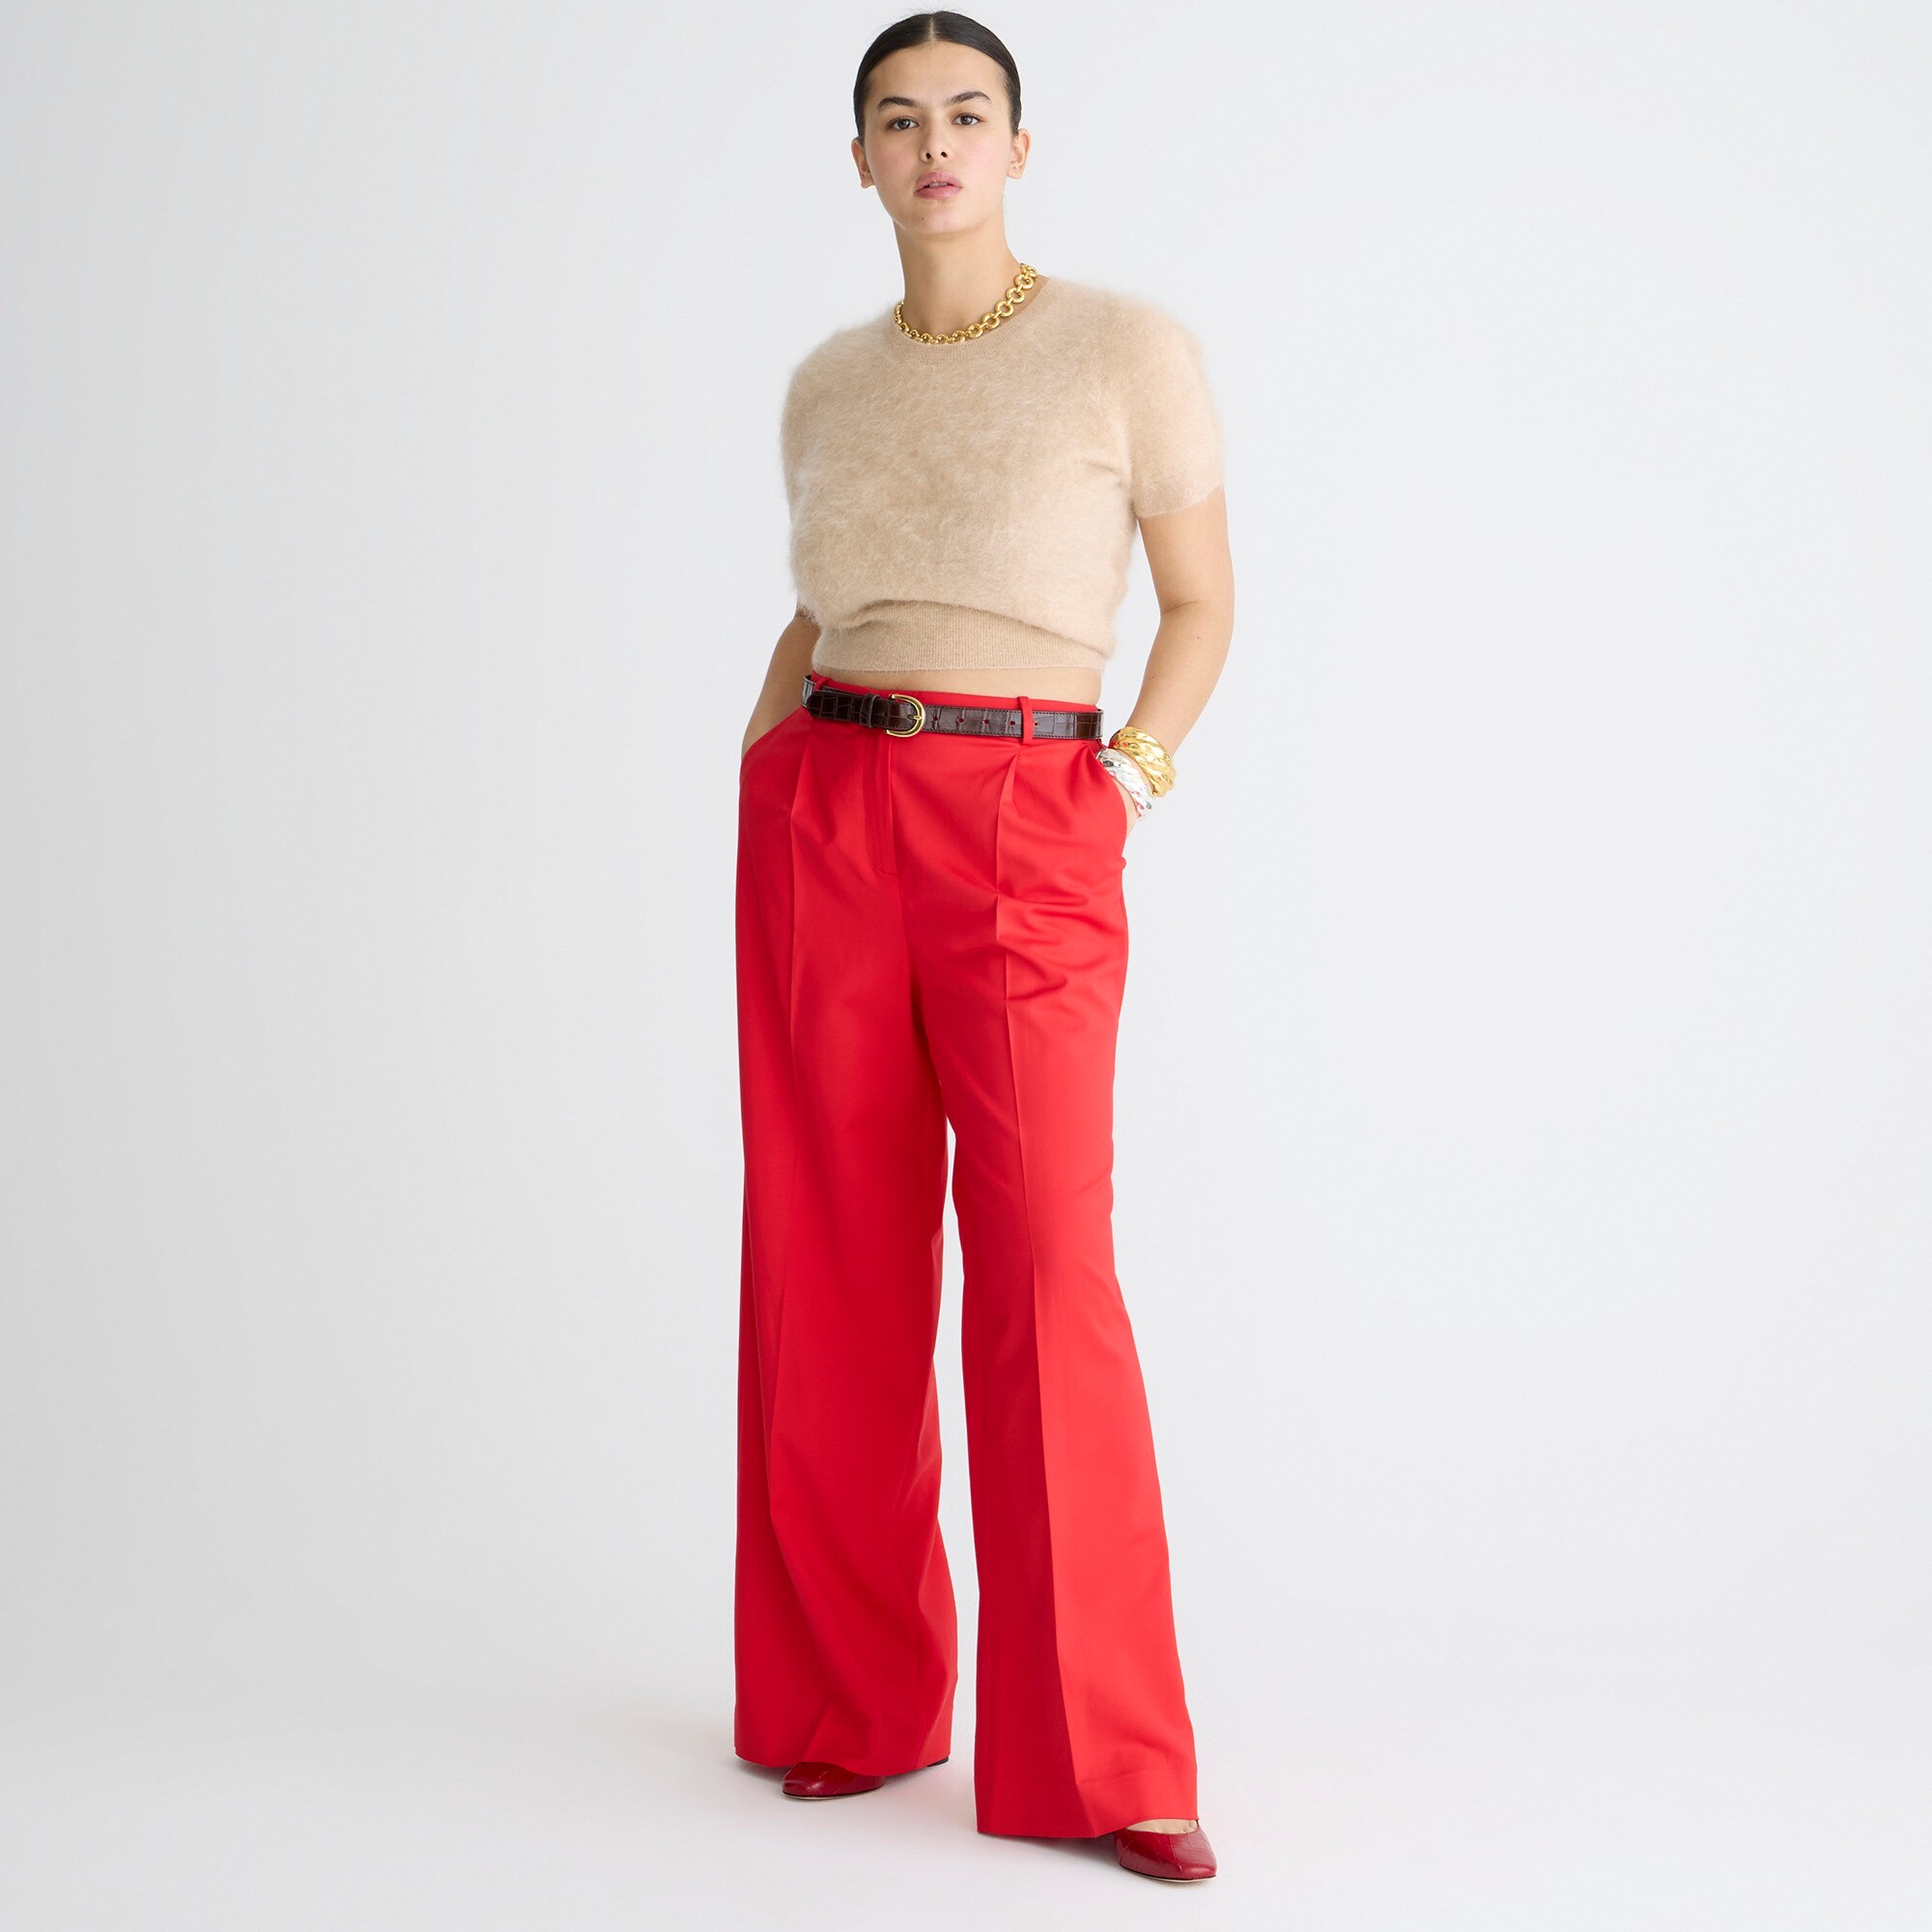 j.crew: wide-leg essential pant in city twill for women